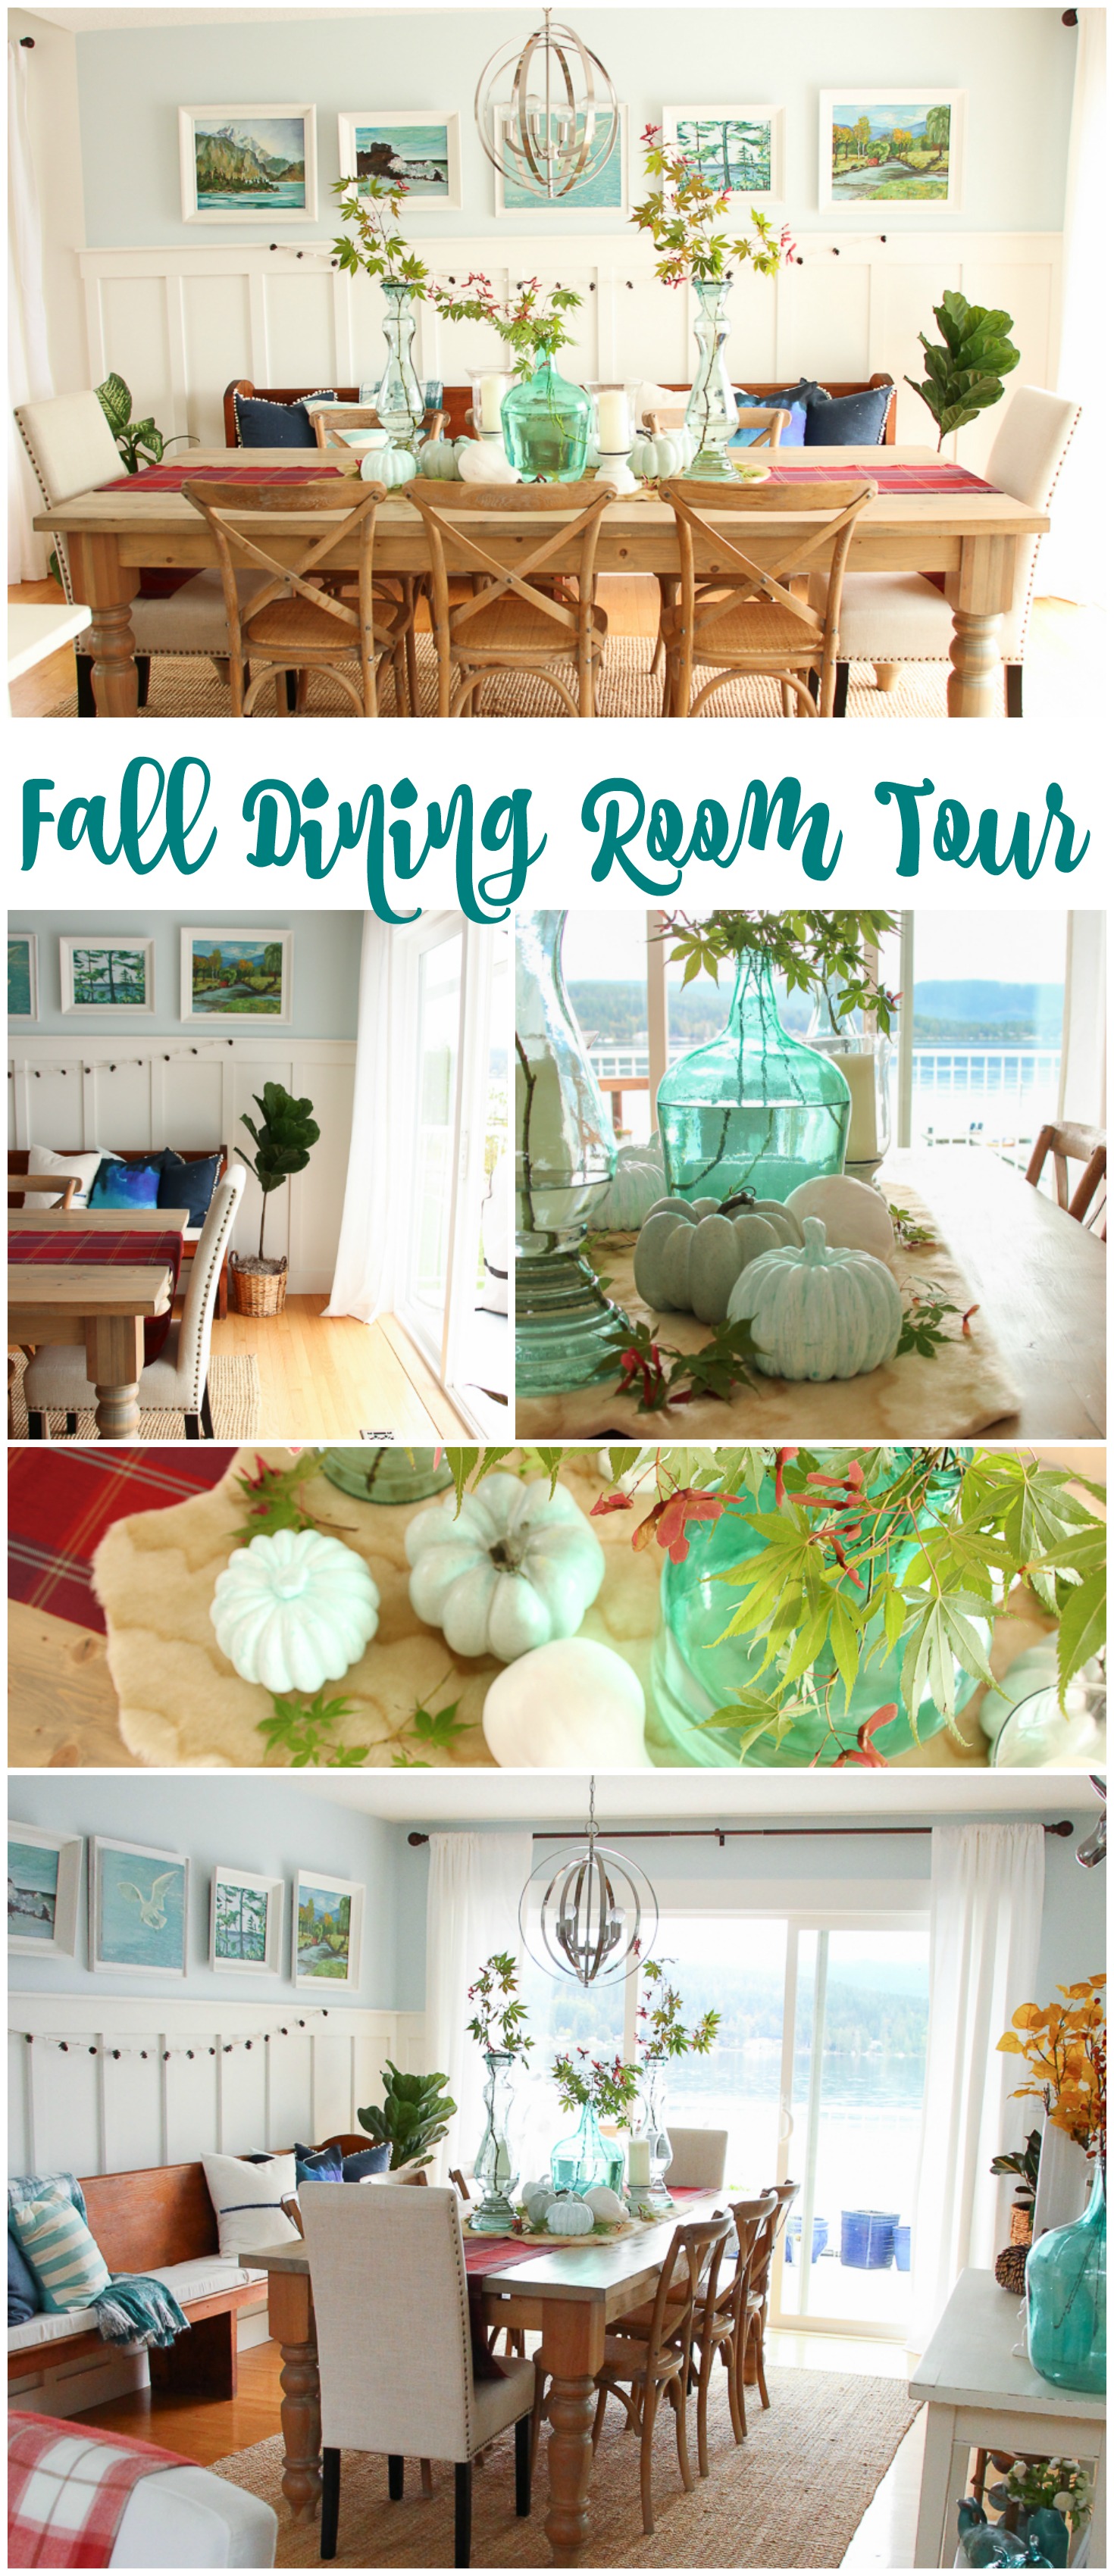 come-and-tour-this-light-bright-and-airy-fall-lakefront-dining-room-with-warm-fall-plaids-and-coastal-aquas-and-blues